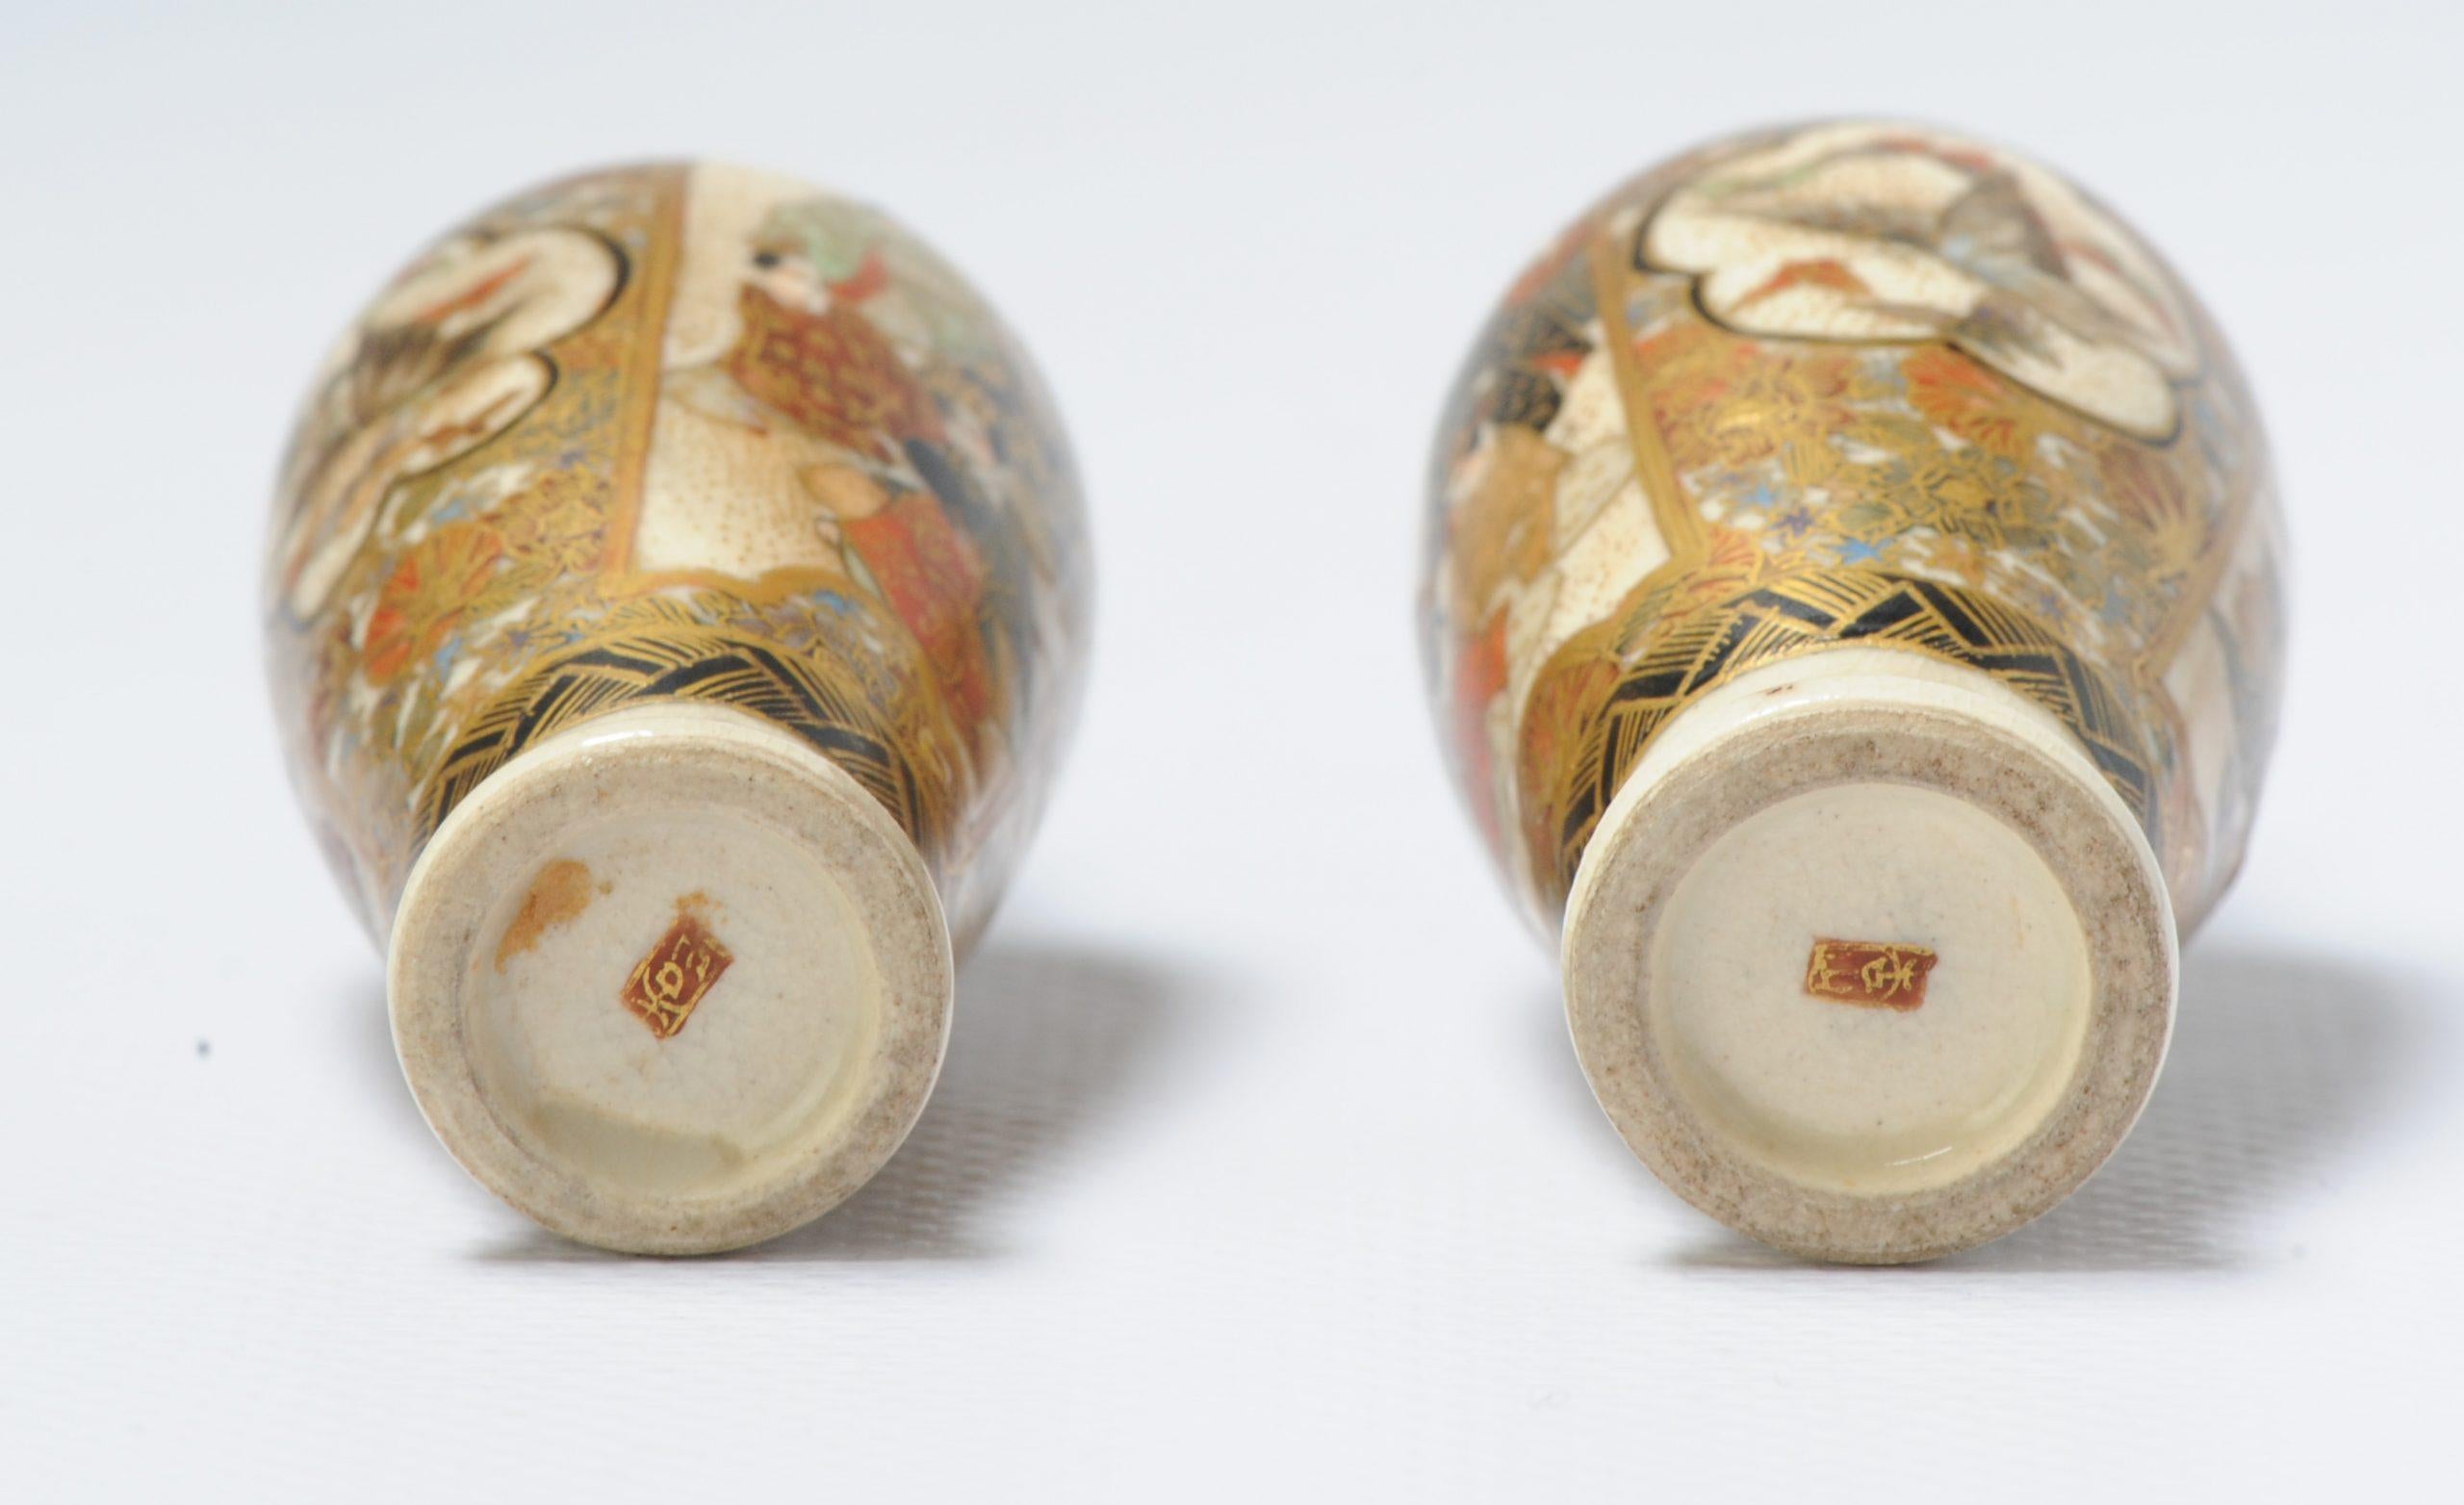 Interesting and finely painted pair of satsuma vases. Very cool and of high quality.

Additional information:
Primary Material: Bronze, Porcelain & Cloisonne
Material: Porcelain & Pottery
Japanese Style: Satsuma
Region of Origin: Japan
Period: 19th